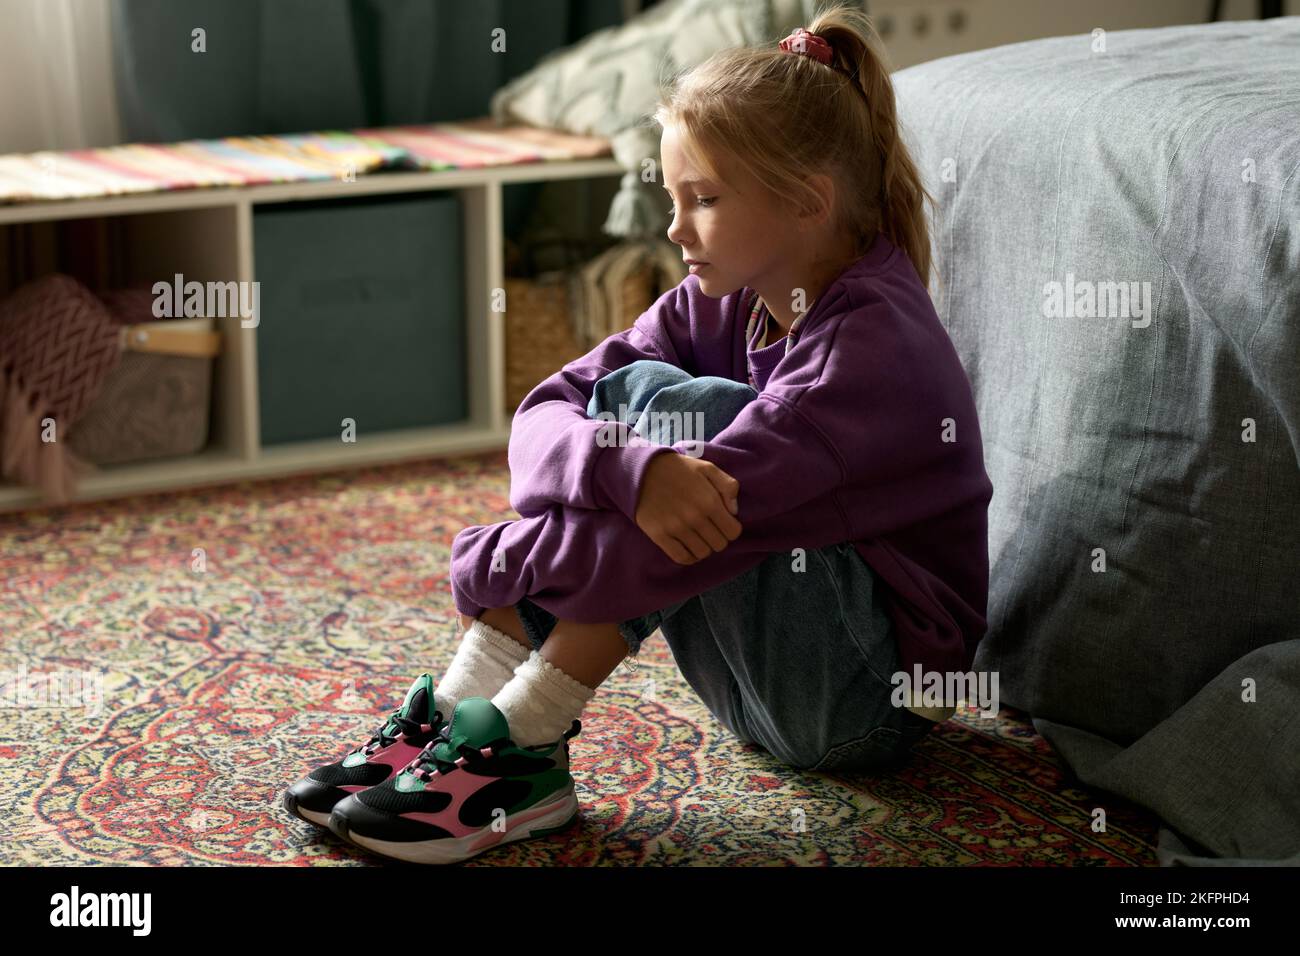 Little girl with sad expression sitting on floor along in her room Stock Photo